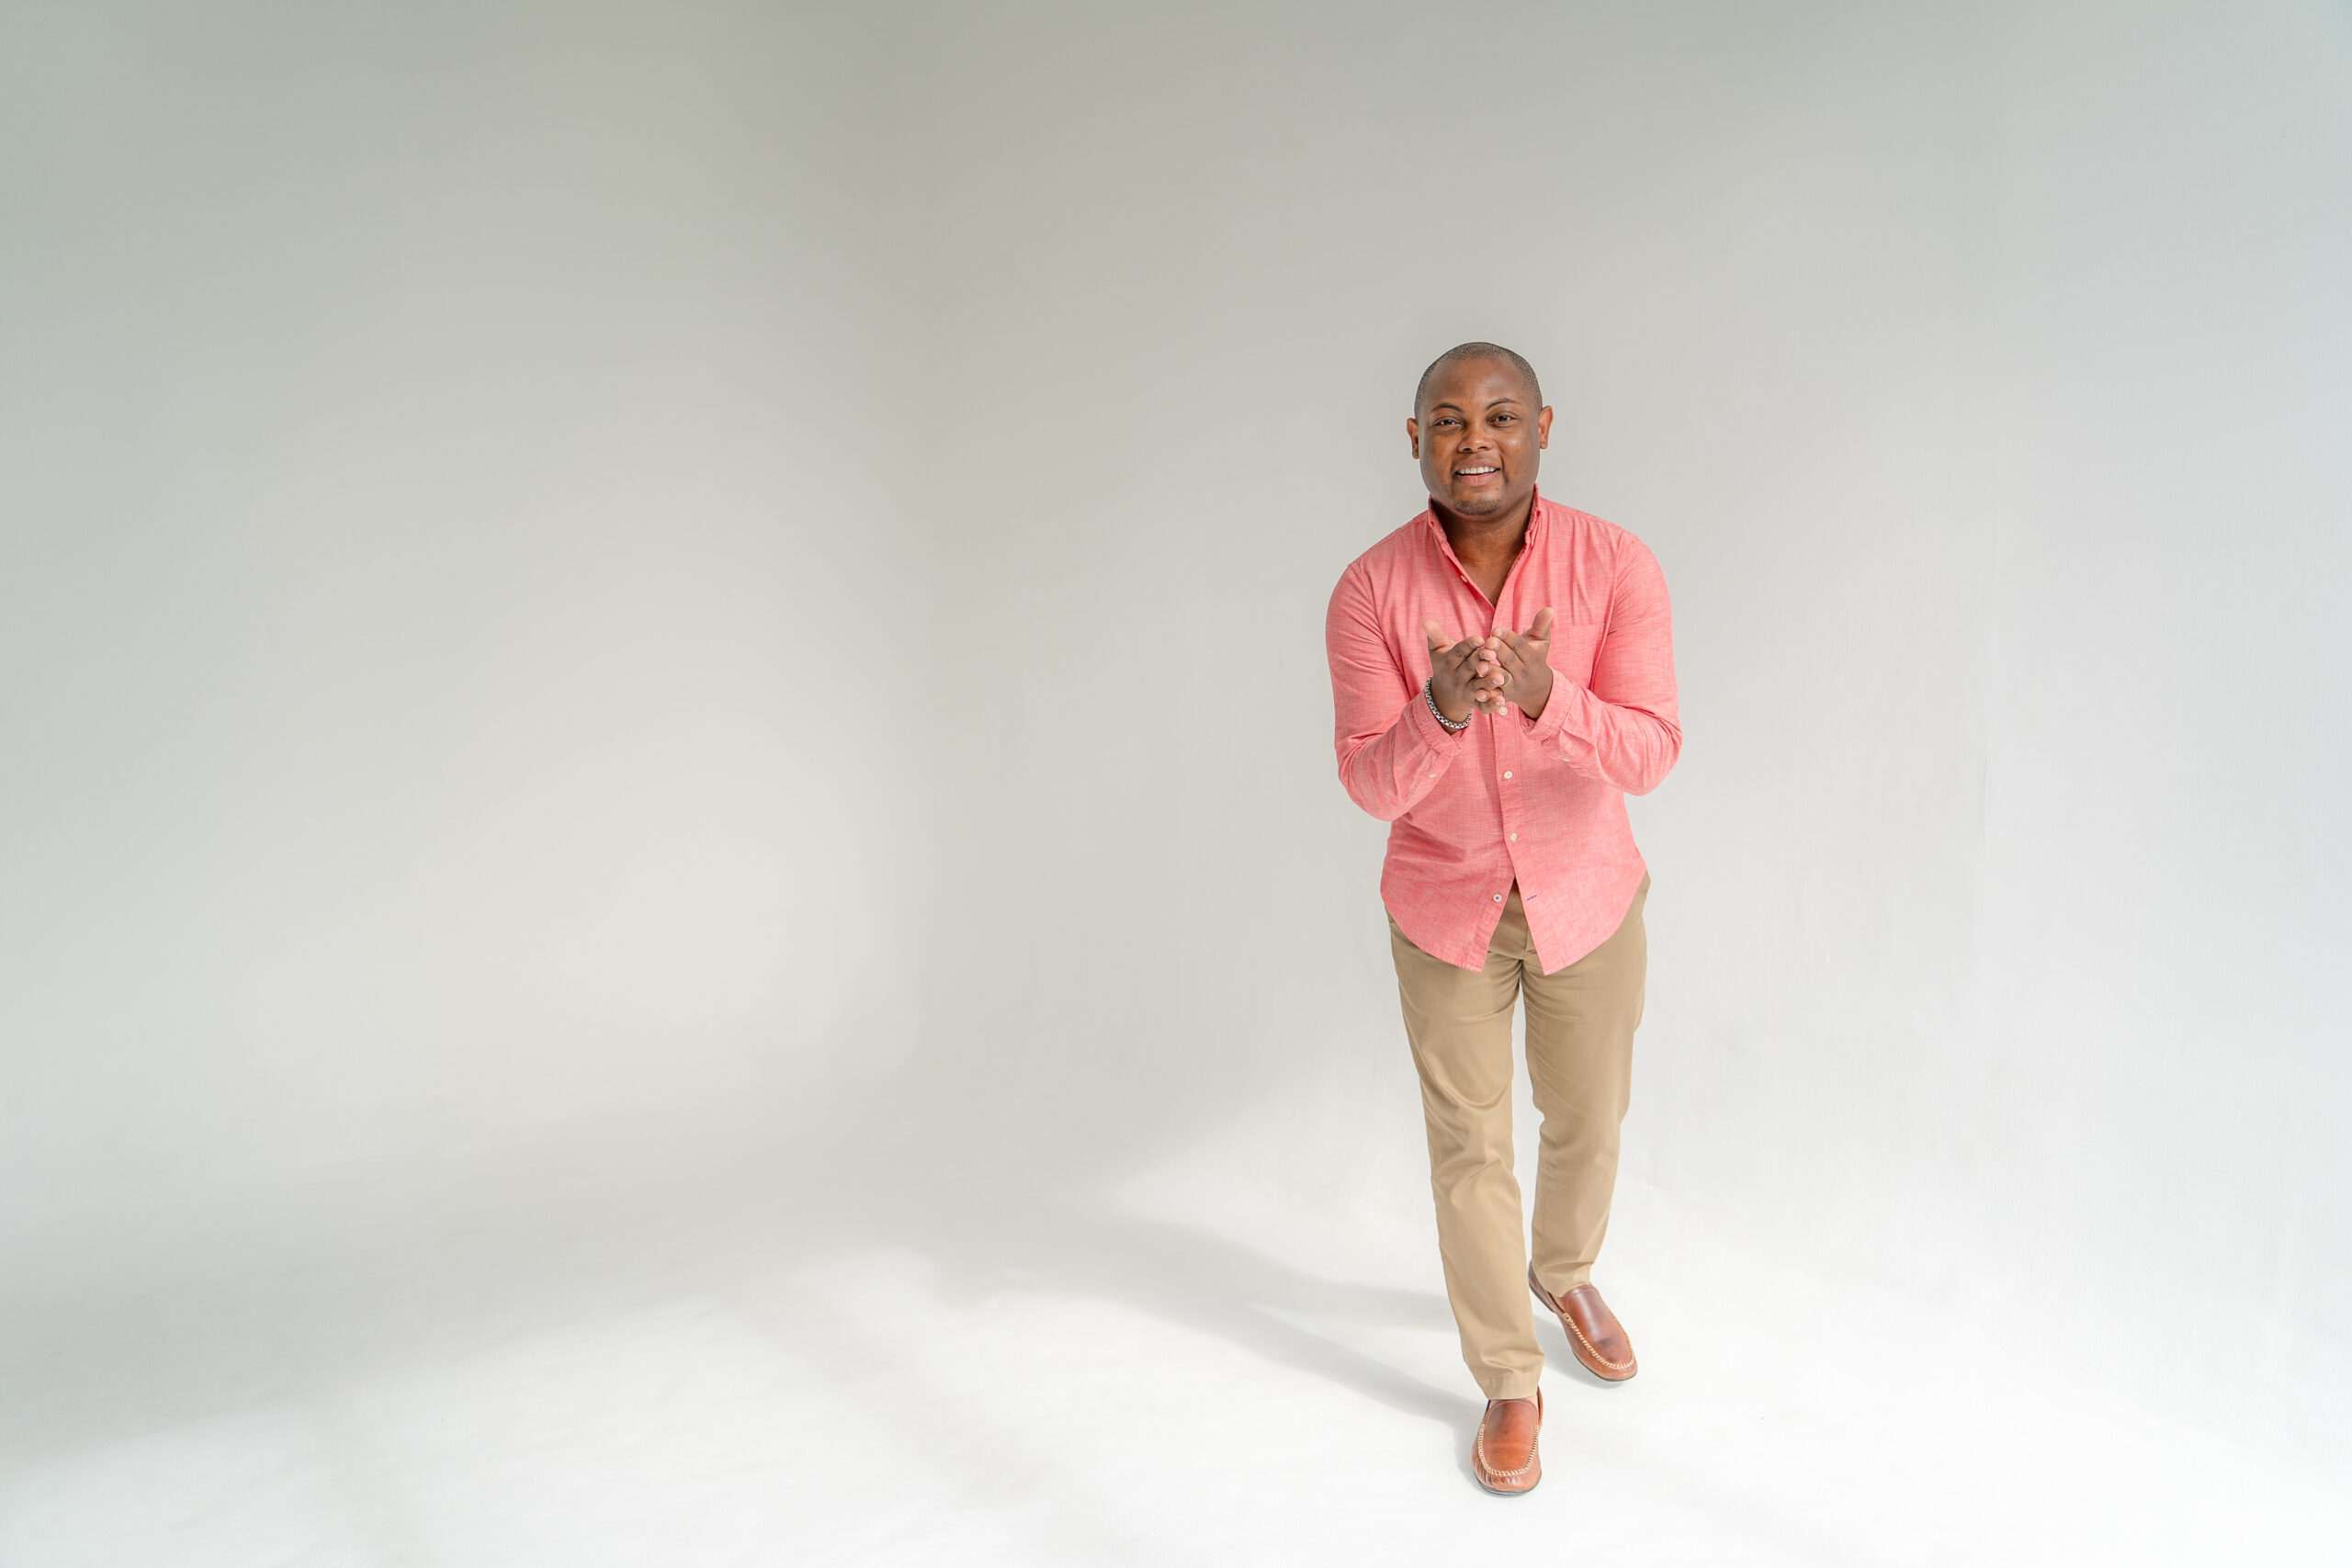 Confident man in a casual coral button-up shirt and khaki pants with brown shoes, standing with clasped hands and a pleasant expression in a bright, spacious studio